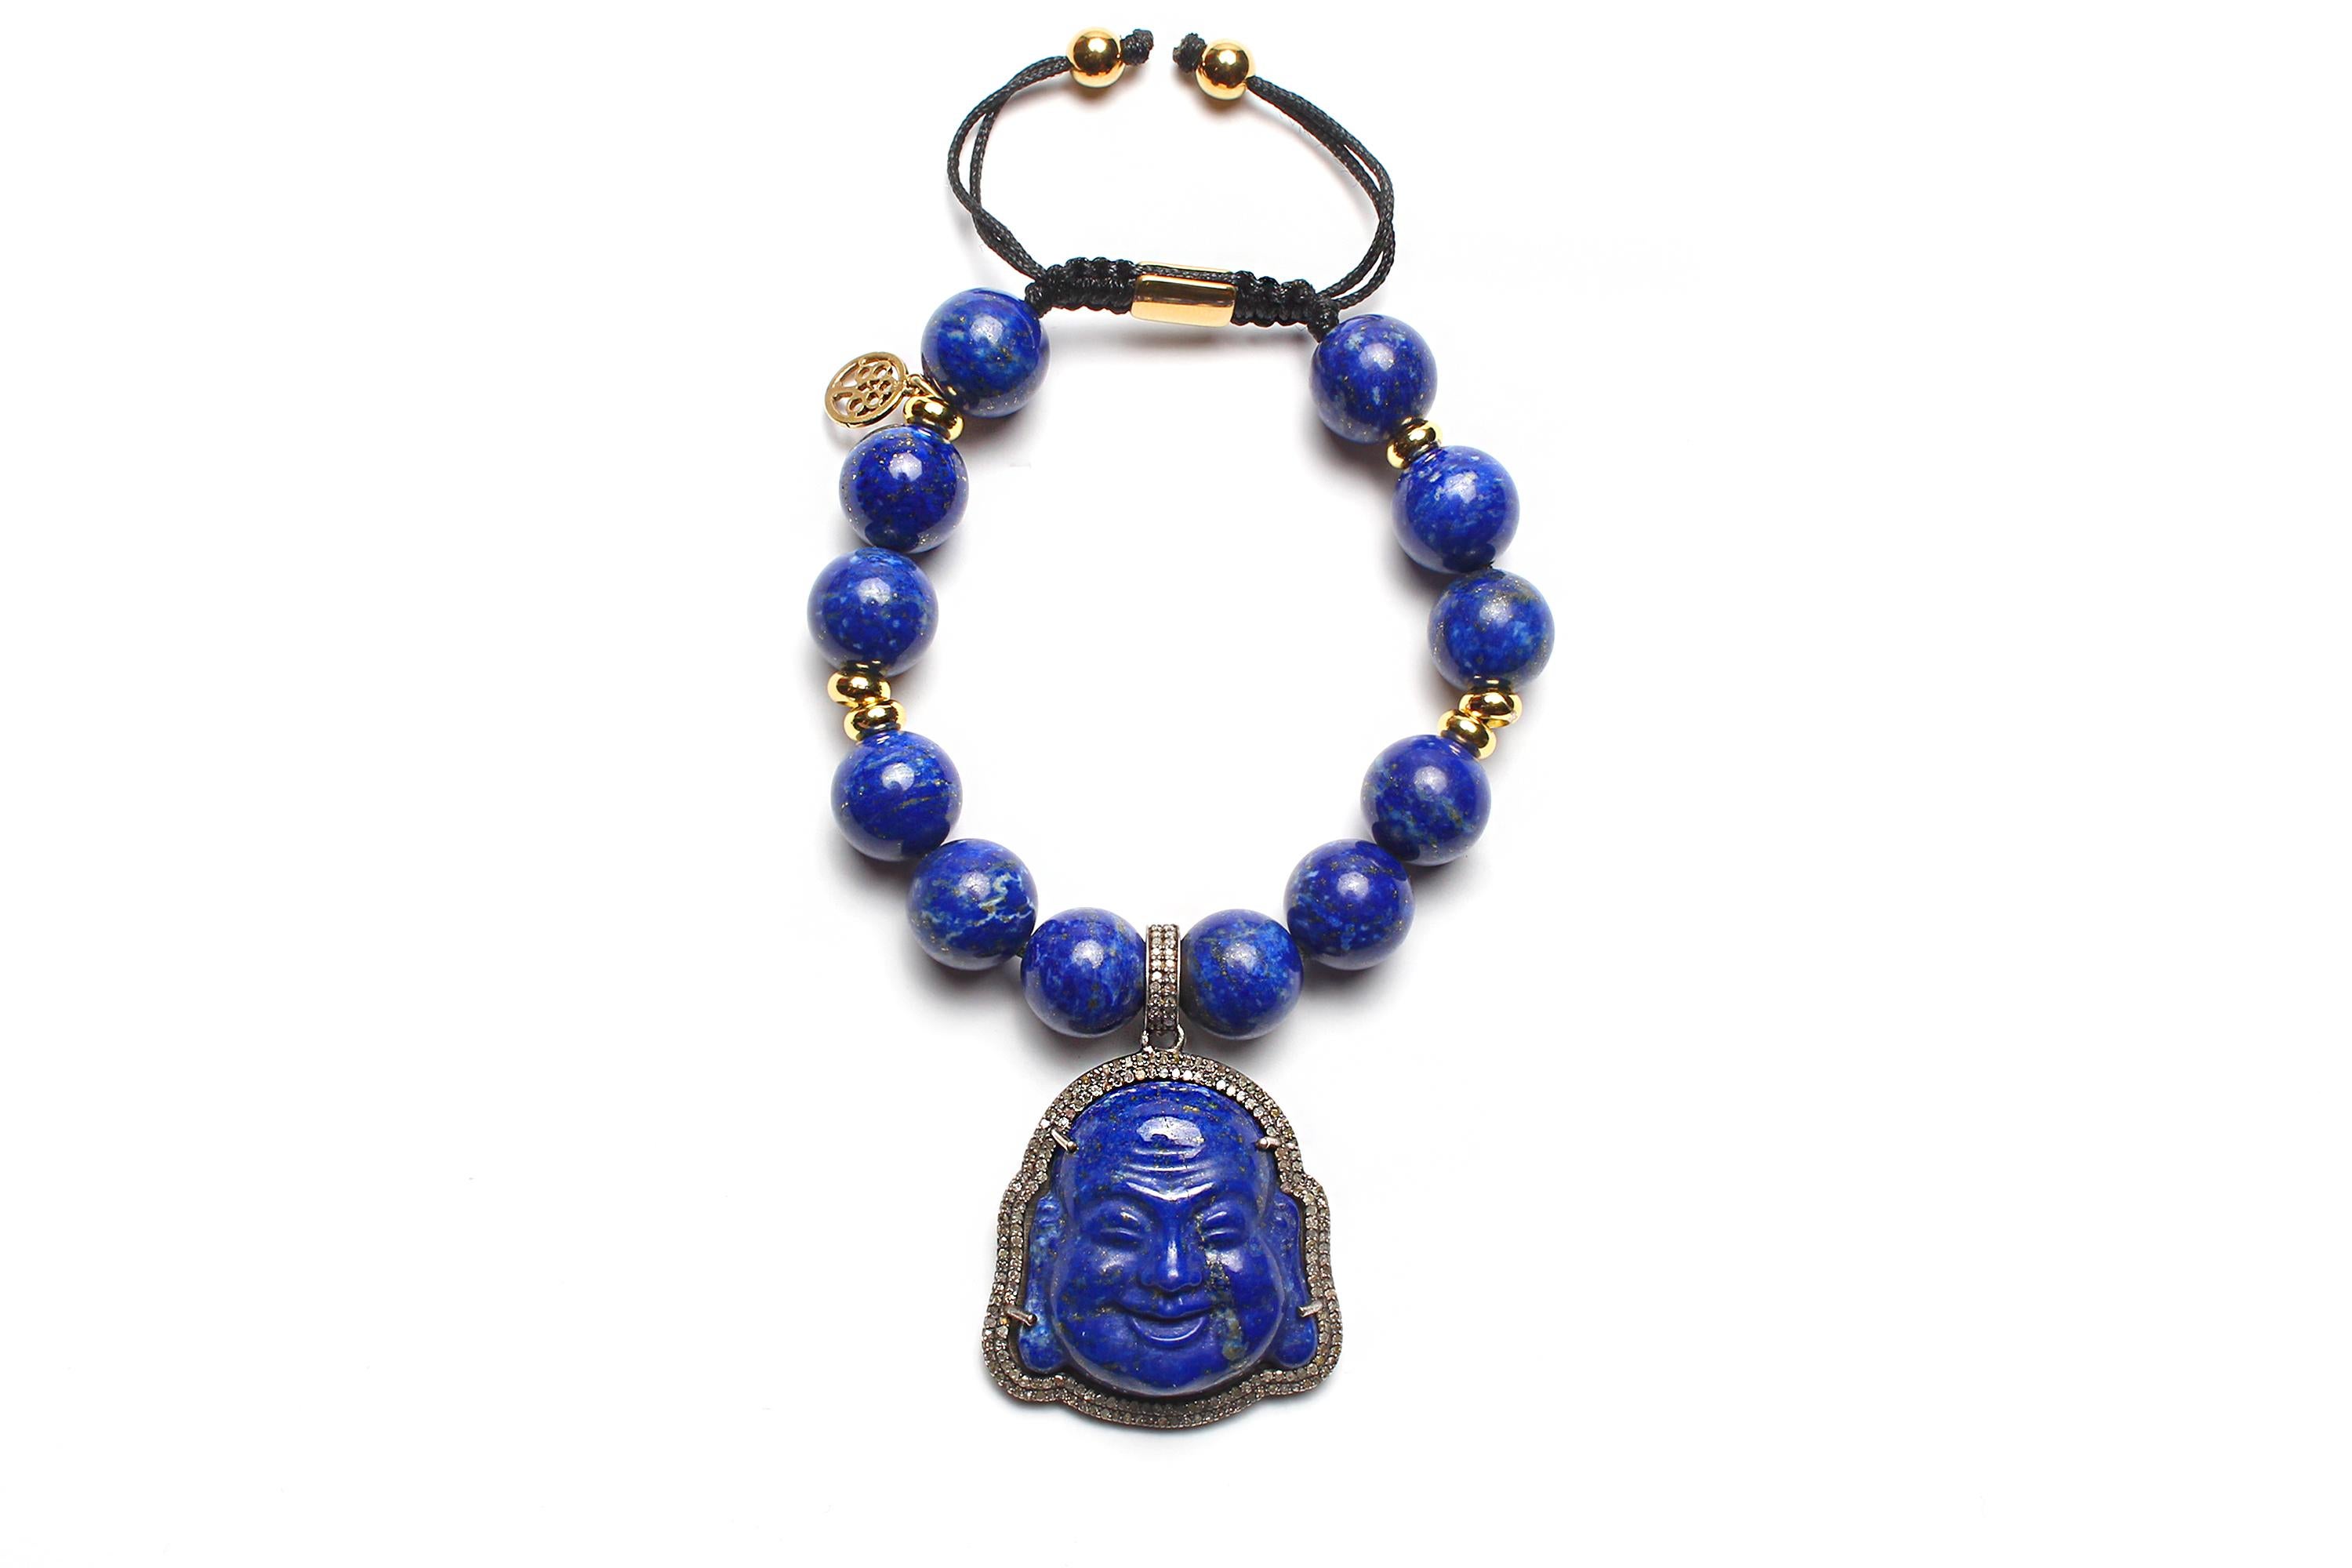 This beautiful zen bracelet with an adjustable cord is your perfect boho chic accessory!

- lapis lazuli grade AAA+ 12 mm round smooth beads
- 6 mm 14k gold small spacer beads
- blue lapis lazuli 925 sterling silver pave diamond buddha charm
- size